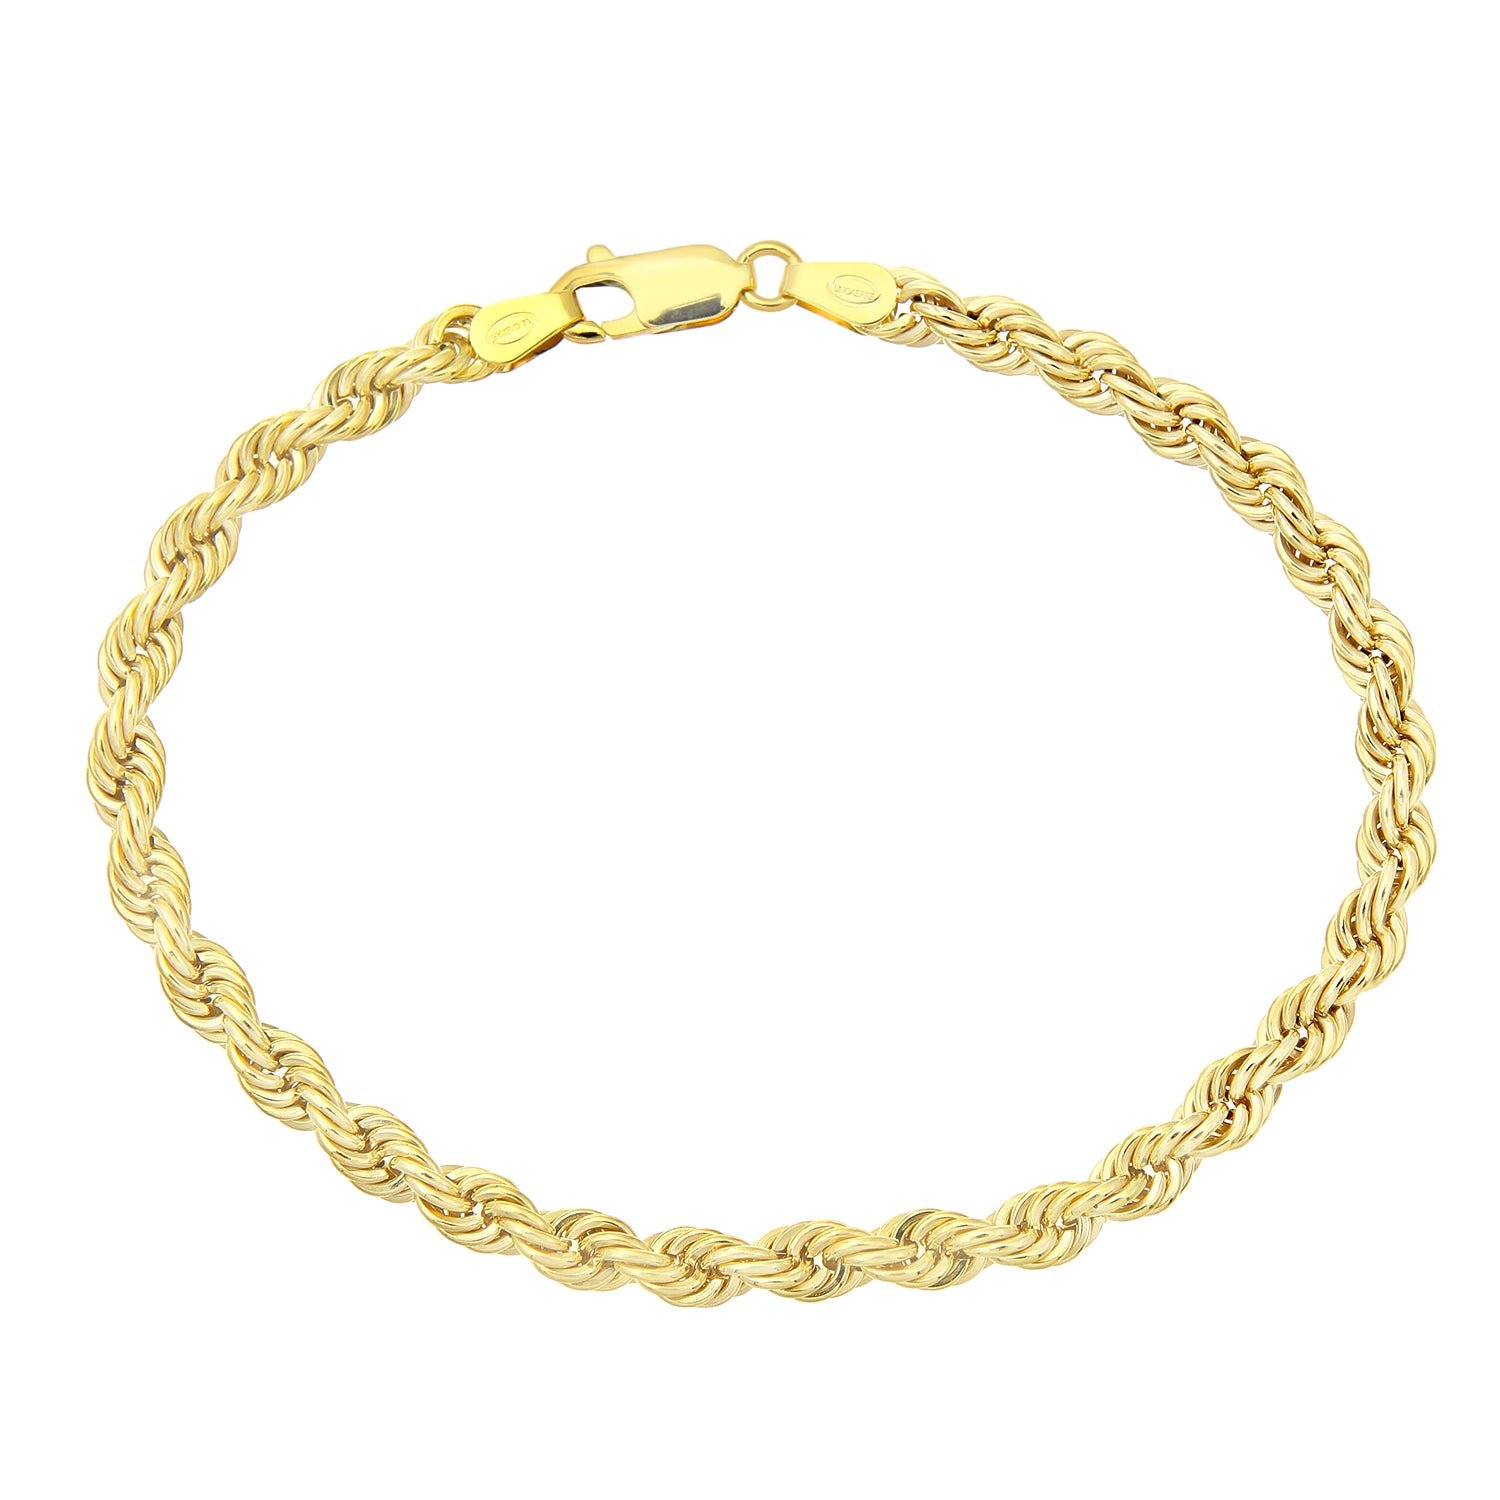 9ct Yellow Gold Thick Rope Bracelet of 7.5 Inch/19cm Length